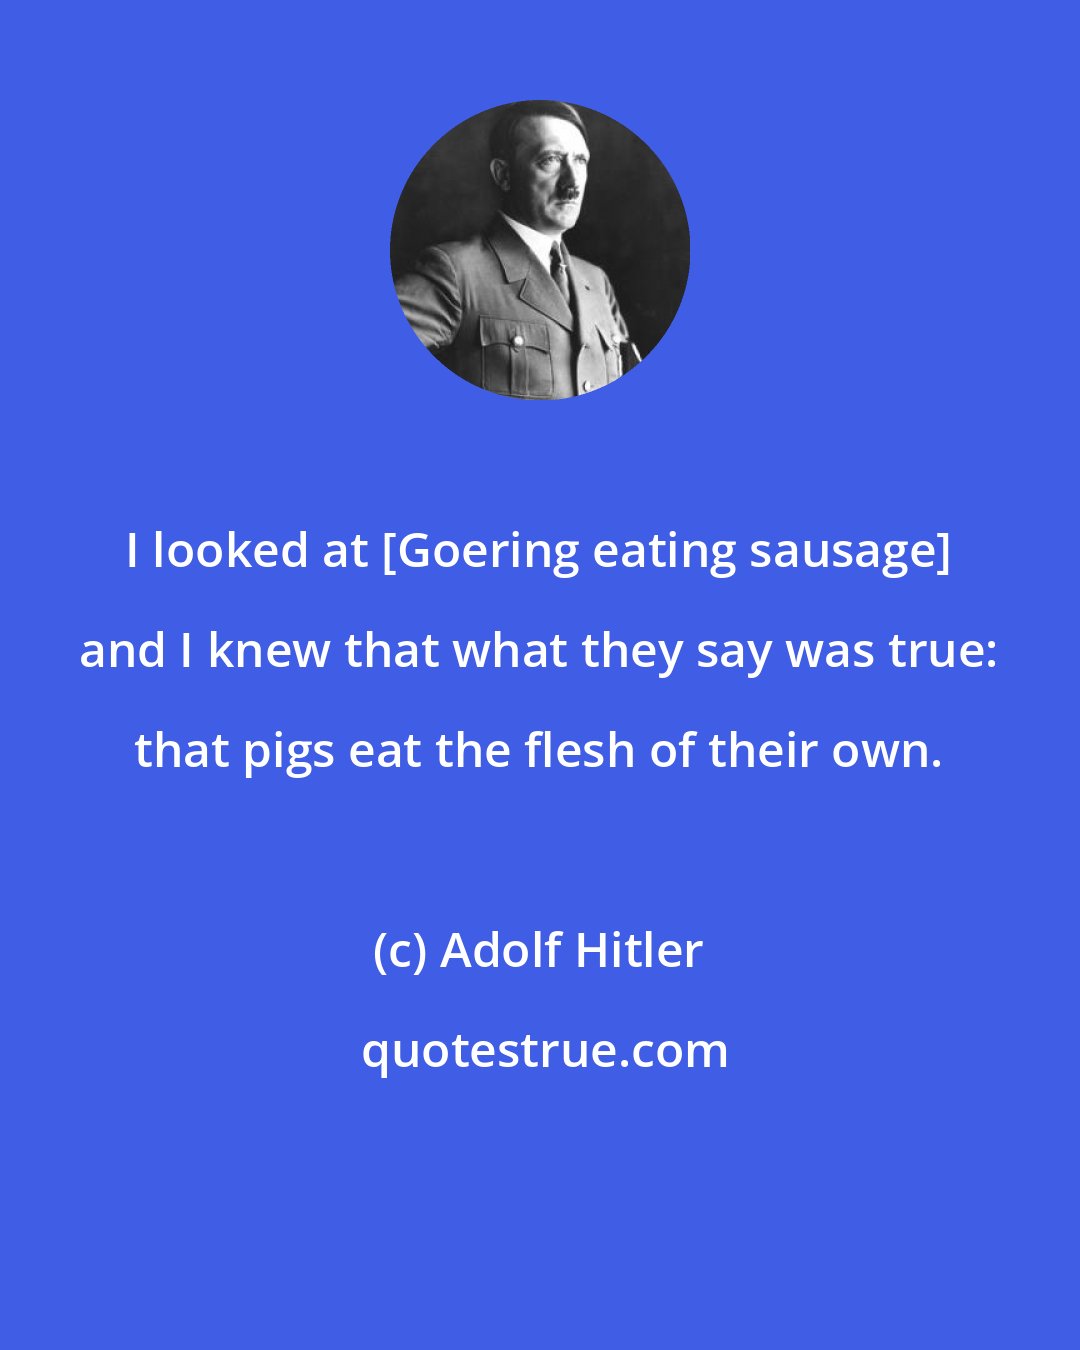 Adolf Hitler: I looked at [Goering eating sausage] and I knew that what they say was true: that pigs eat the flesh of their own.